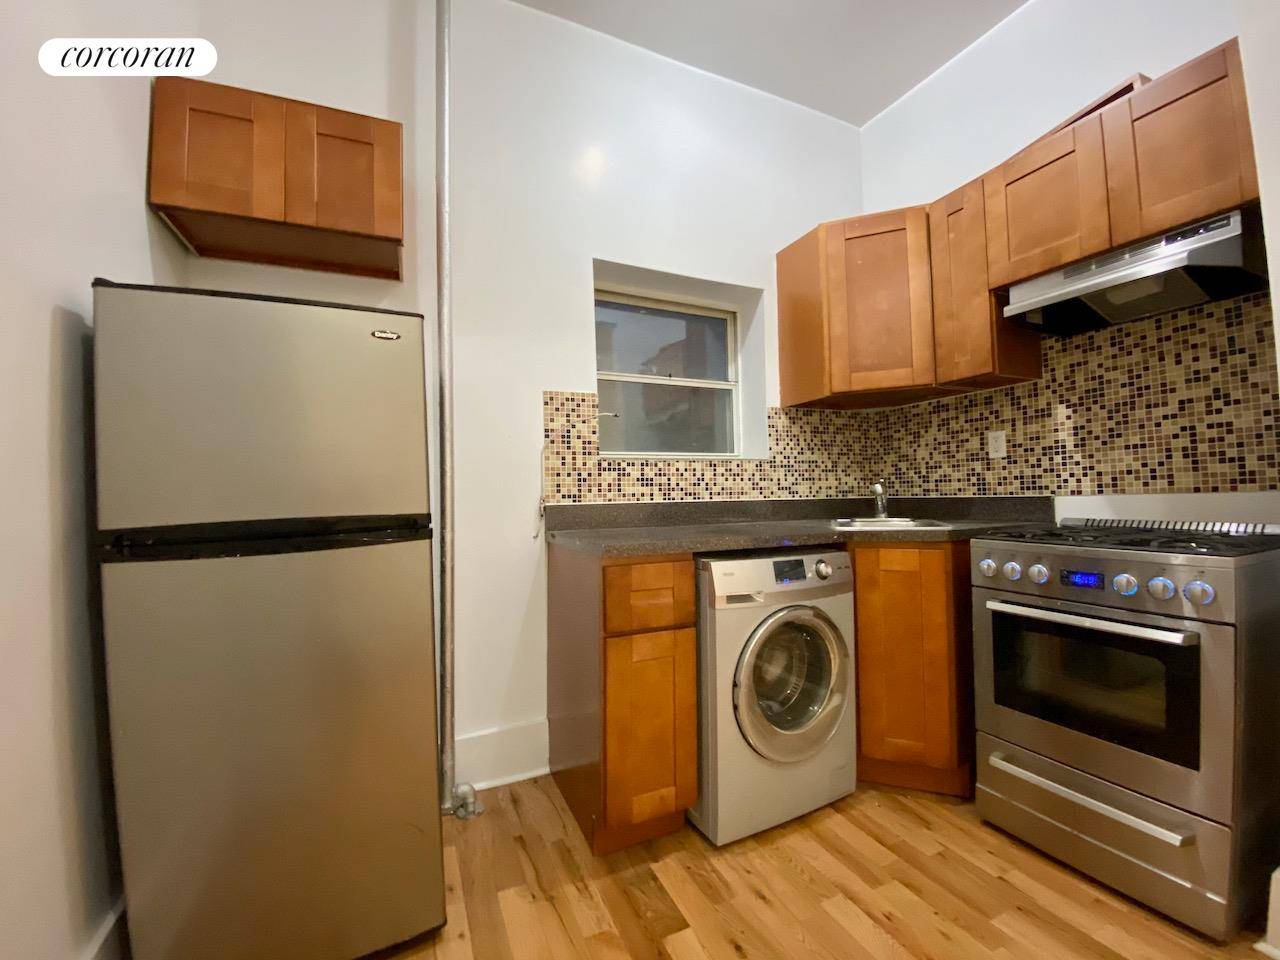 WASHER DRYER IN UNIT 5 CLOSETSRenovated 3 bedroom 1 bathHardwood floors throughoutRent includes heat, hot water and cooking gasCats and small dogs allowed with permission from mgmtGuarantors accepted Personal !